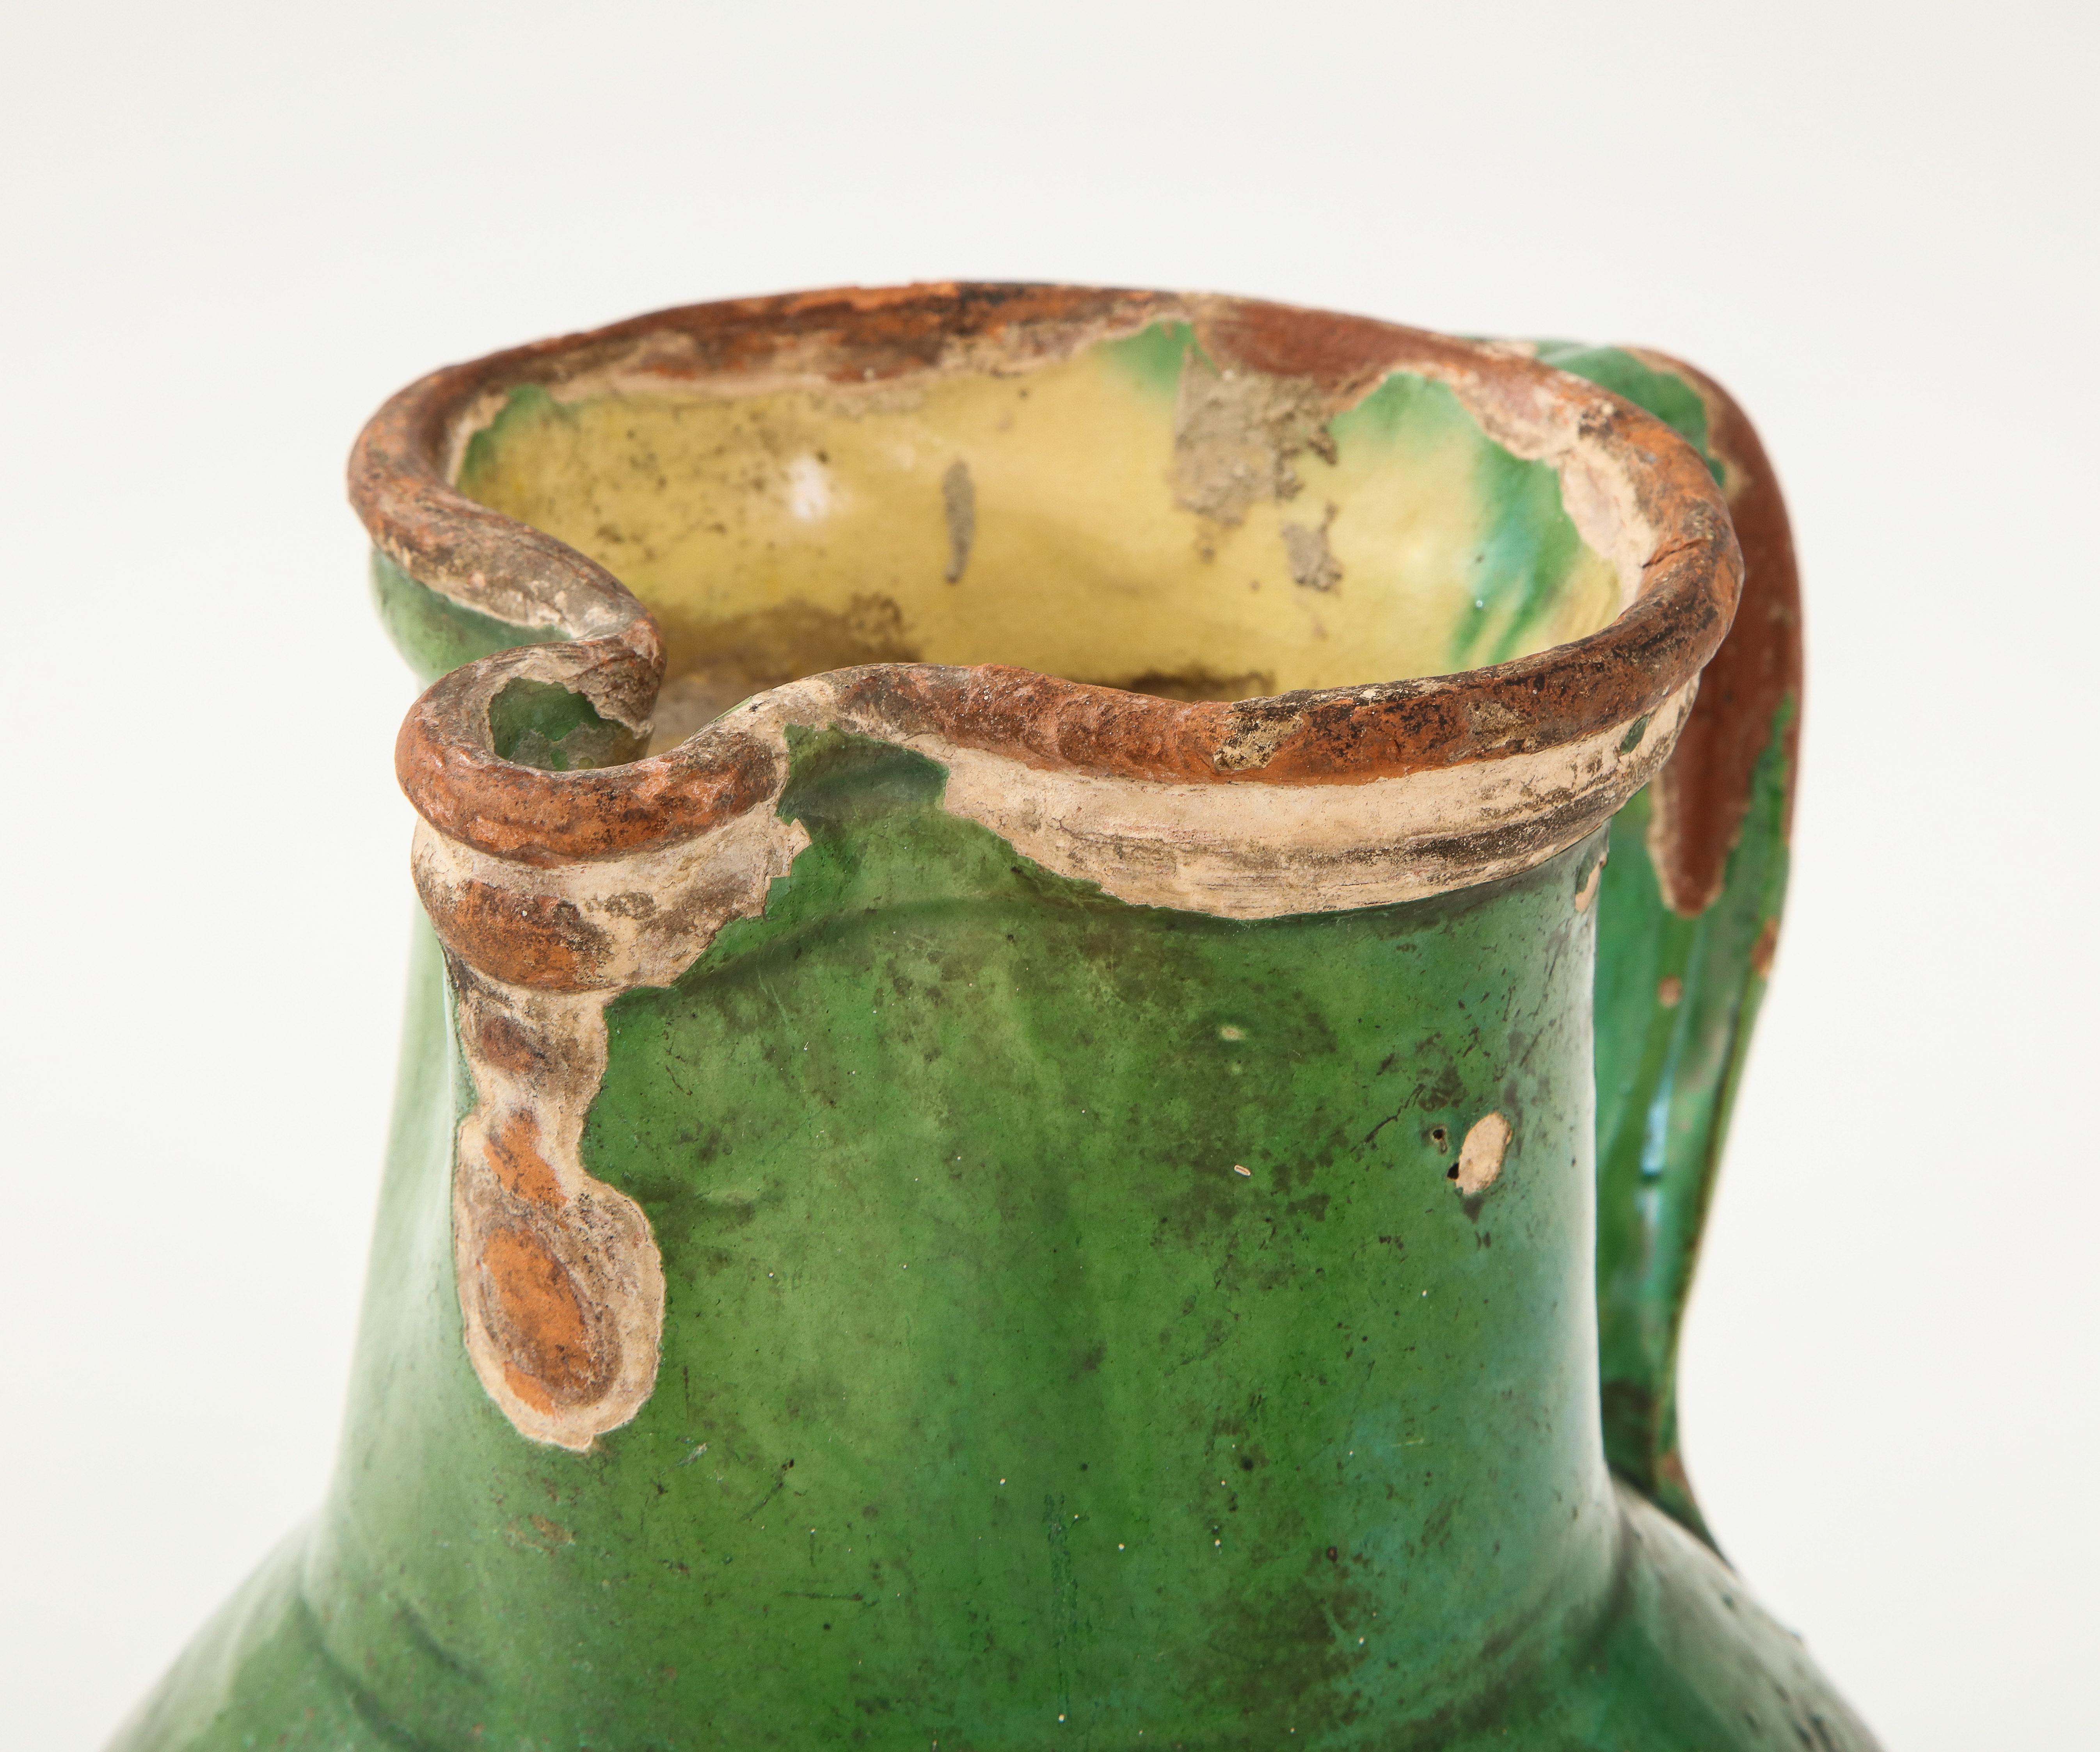 Glazed 17th Century Earthenware Pitcher with Yellow and Green Glaze, Friesland